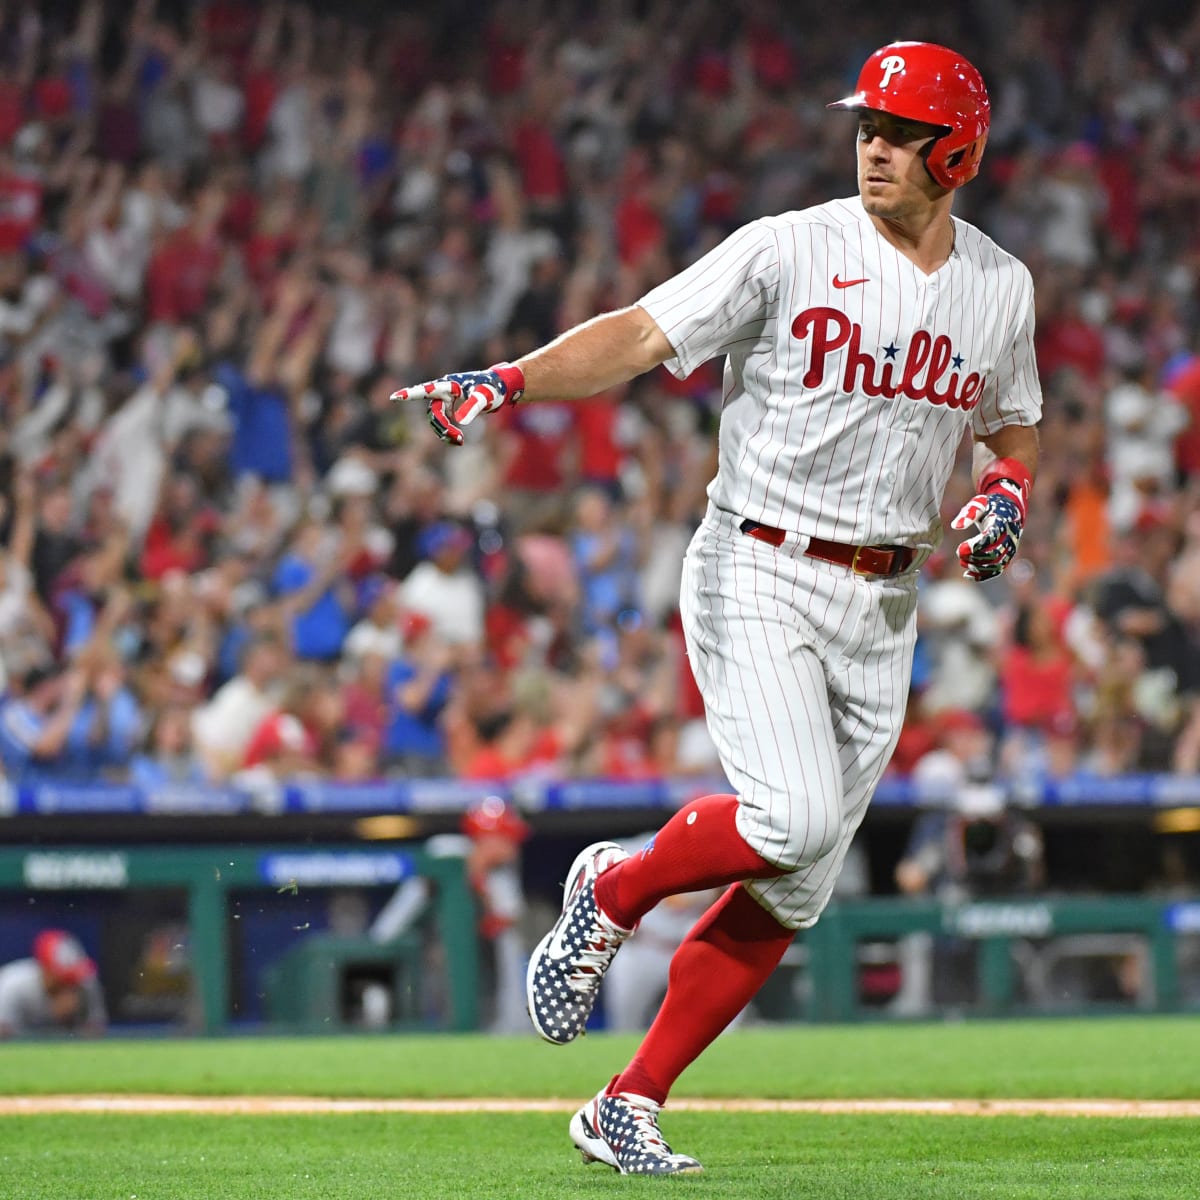 J.T. Realmuto is on path to be greatest catcher in Phillies history   Phillies Nation - Your source for Philadelphia Phillies news, opinion,  history, rumors, events, and other fun stuff.